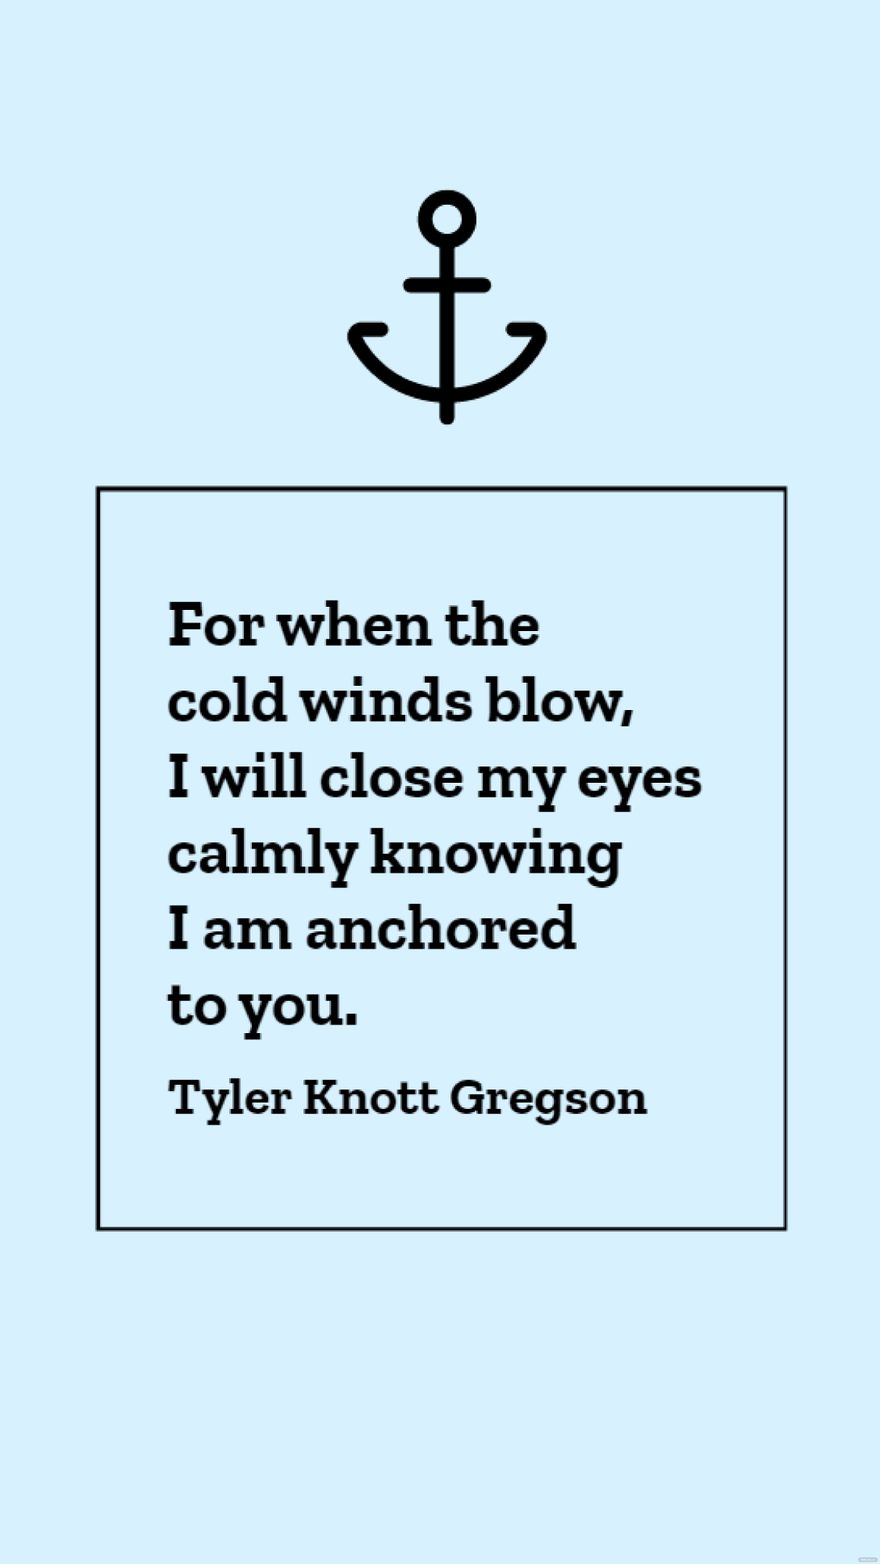 Free Tyler Knott Gregson - For when the cold winds blow, I will close my eyes calmly knowing I am anchored to you.